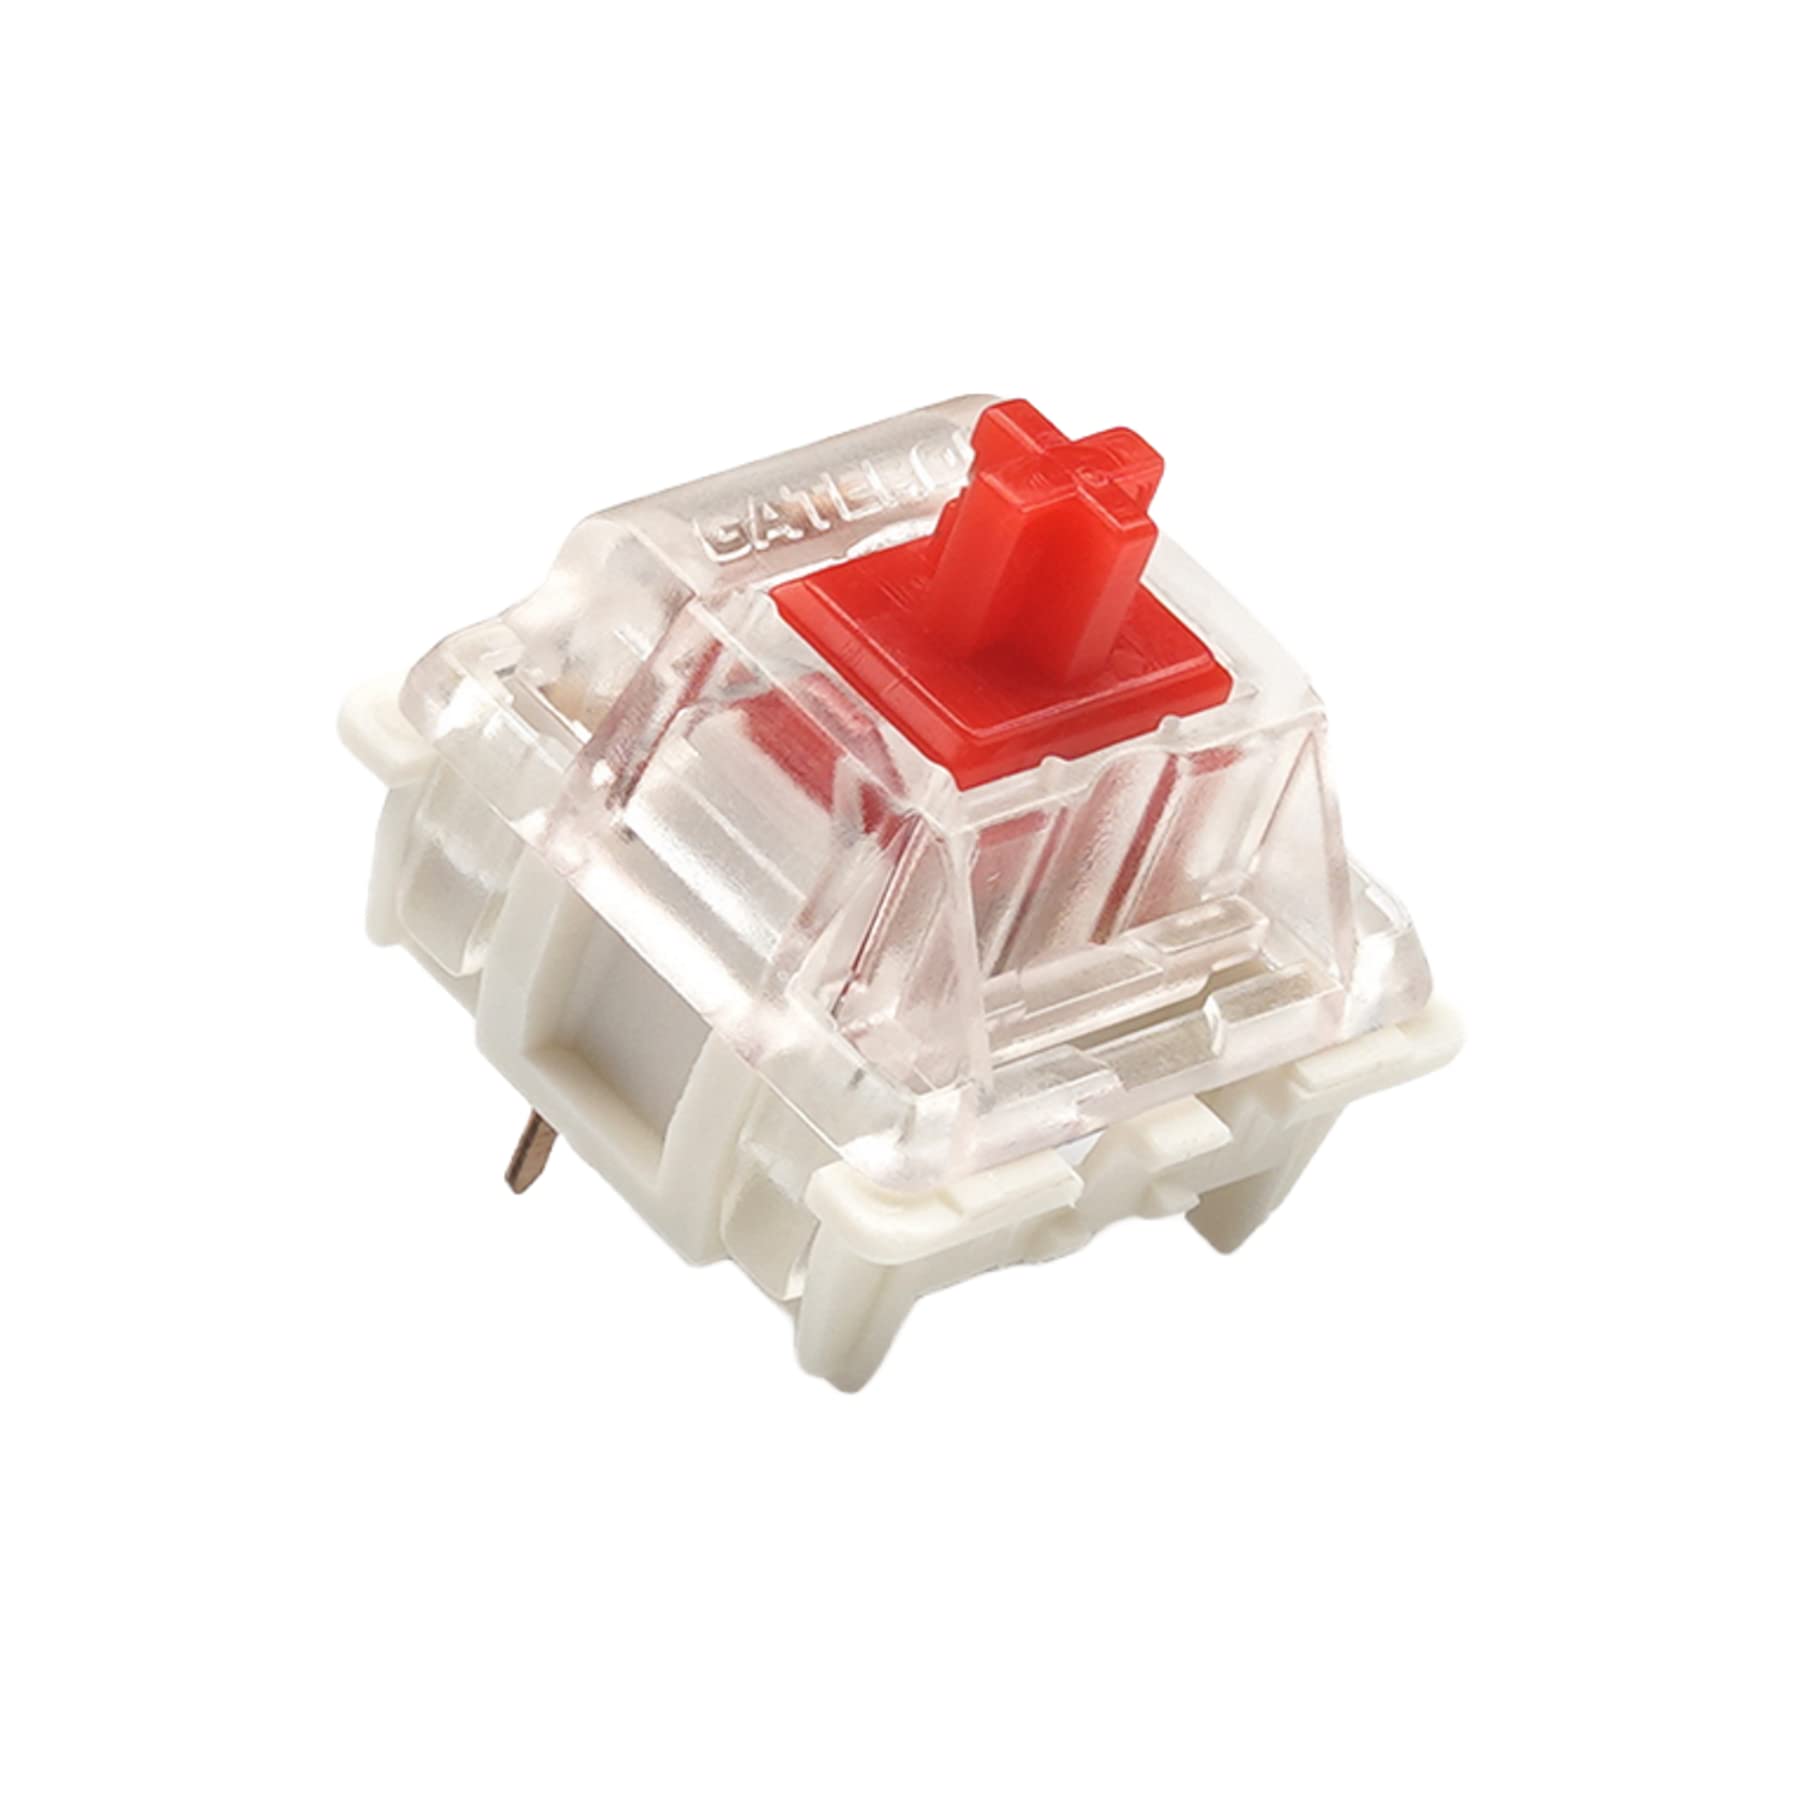 Gateron G Pro v3.0 Red Switches